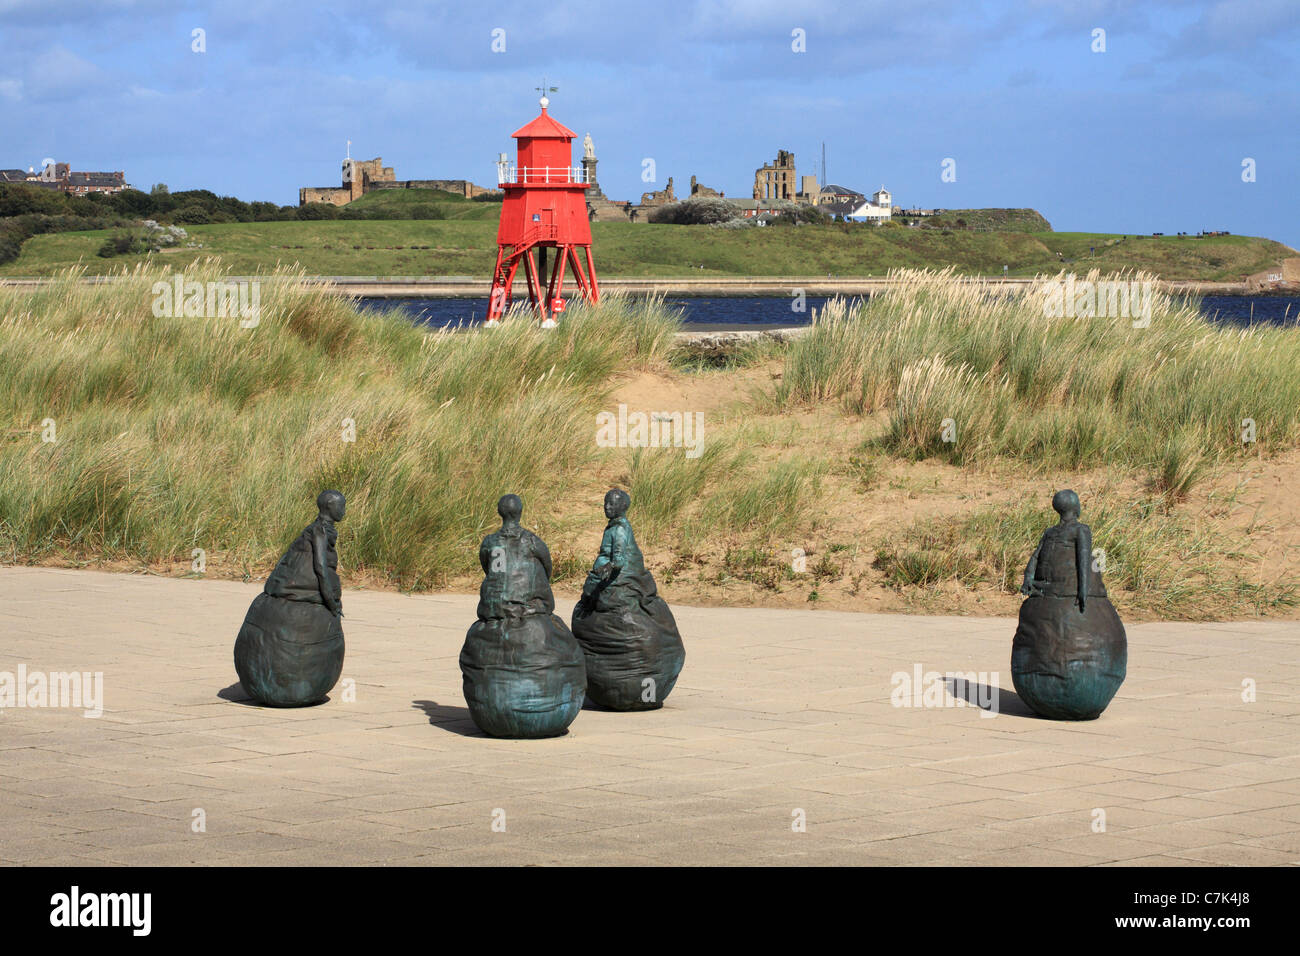 Conversation Piece sculptures and Groyne lighthouse South Shields, North East England, UK Stock Photo